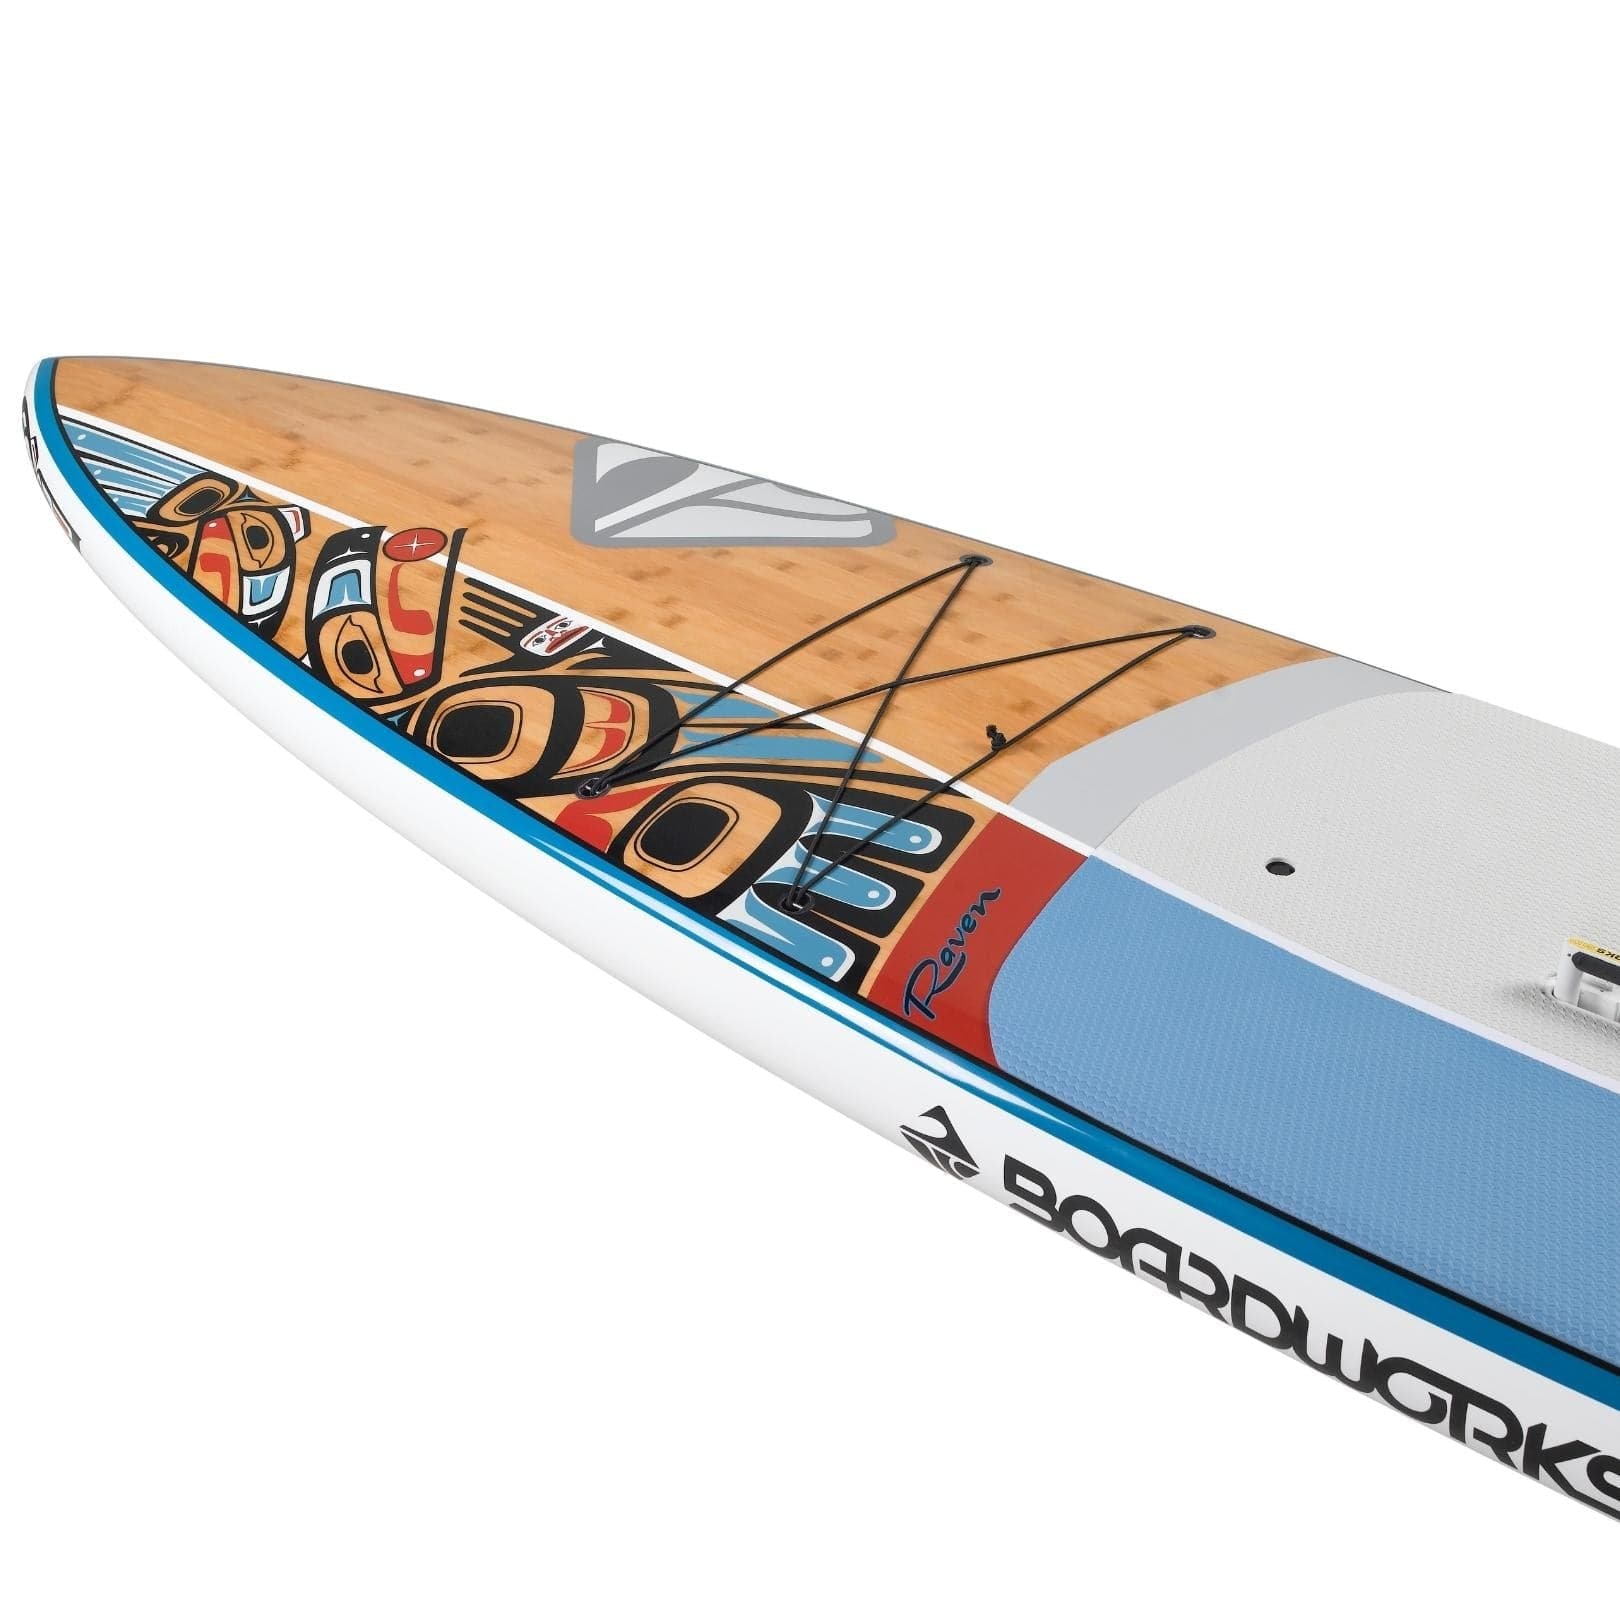 Featuring the Raven 12'6 rigid sup manufactured by Boardworks shown here from a third angle.